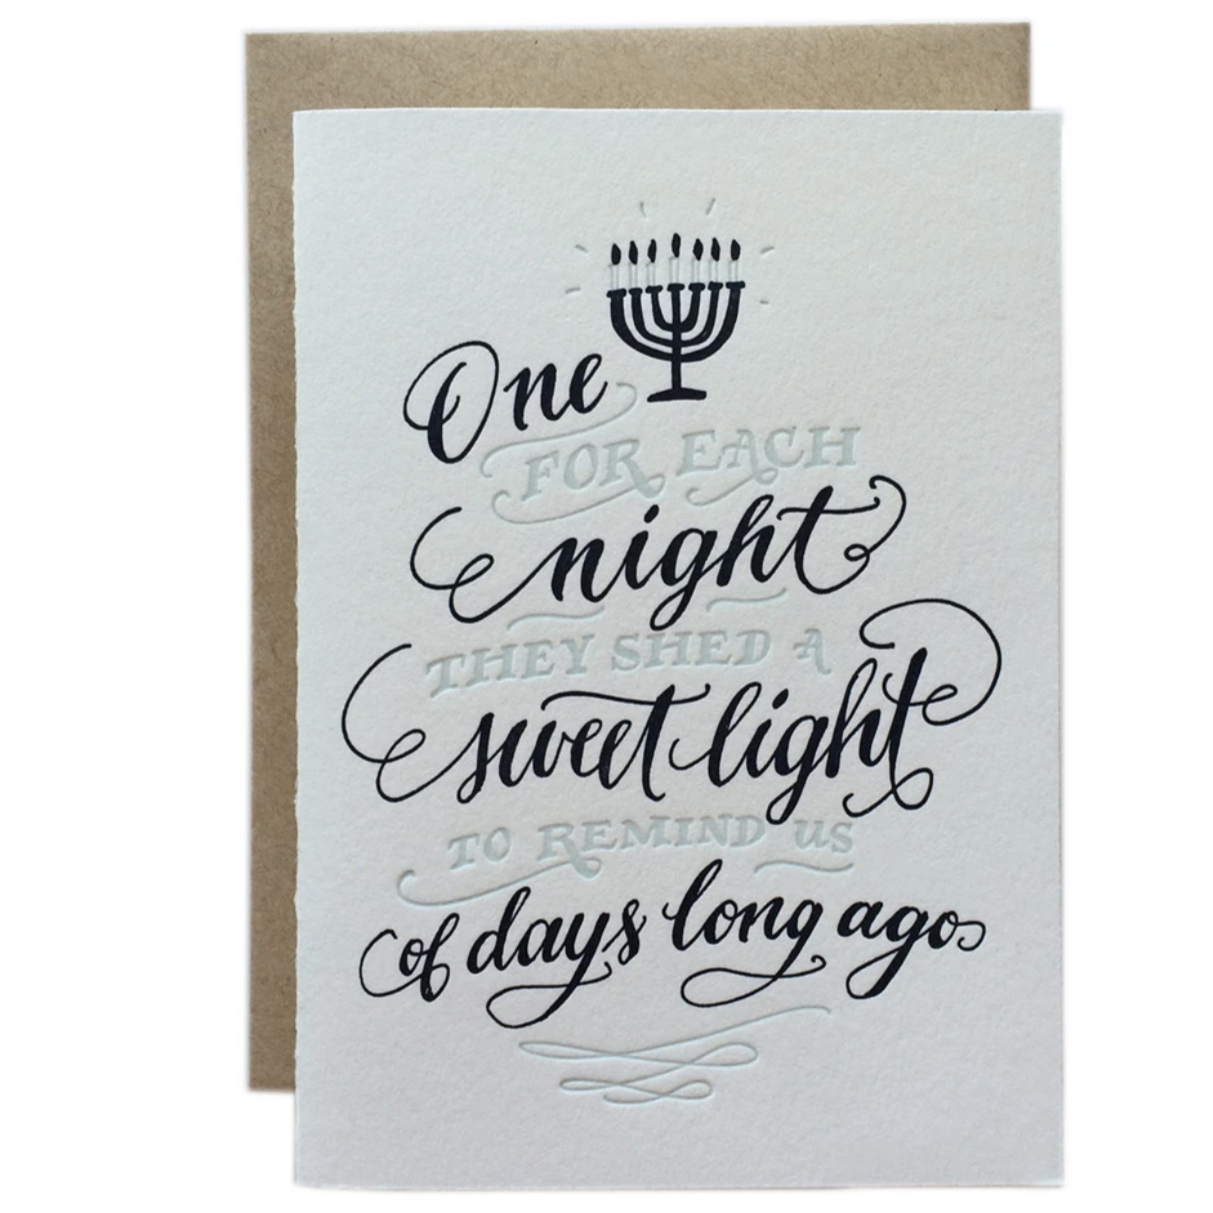 A card with a picture of a menorah reading "One for each night they shed a sweet light to remind us of days long ago."